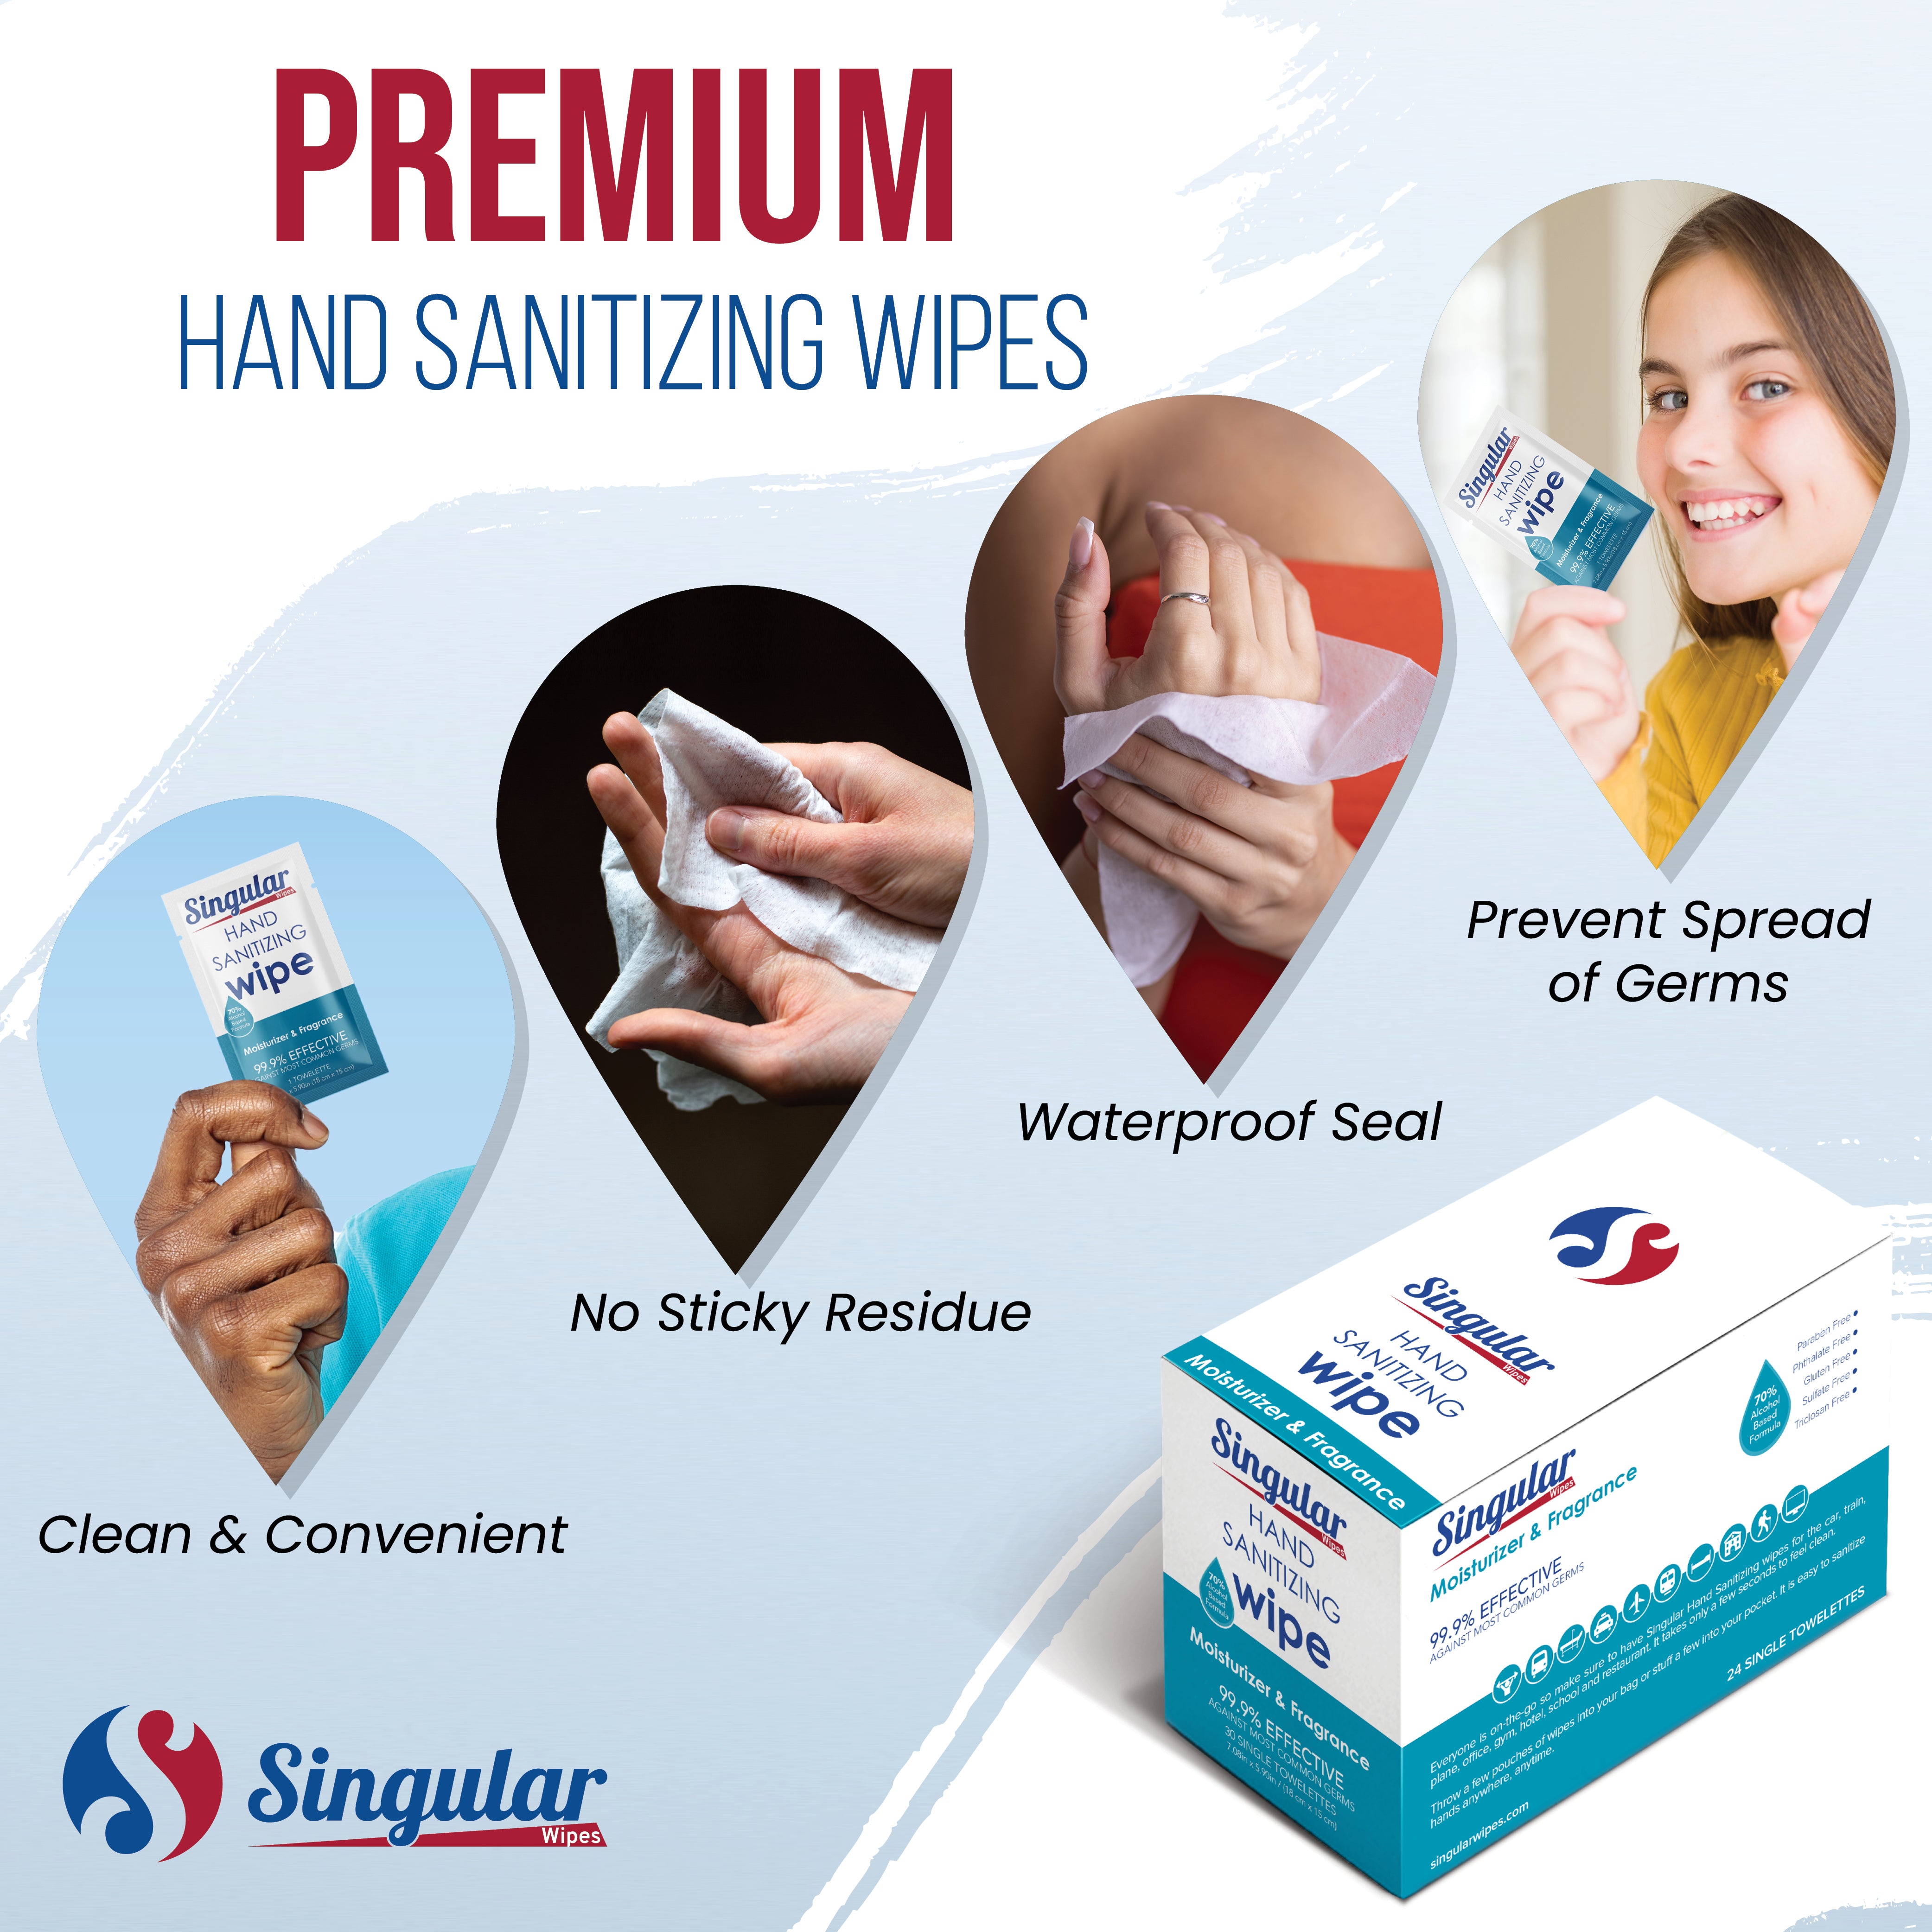 HAND SANITIZING WIPES - Individually Packed Premium Hand Sanitizing Wipes for Travel, Home, Office, School, etc. with Fresh Citrus Fragrance and Moisturizer - Made in USA (Fresh Citrus 24ct Box)